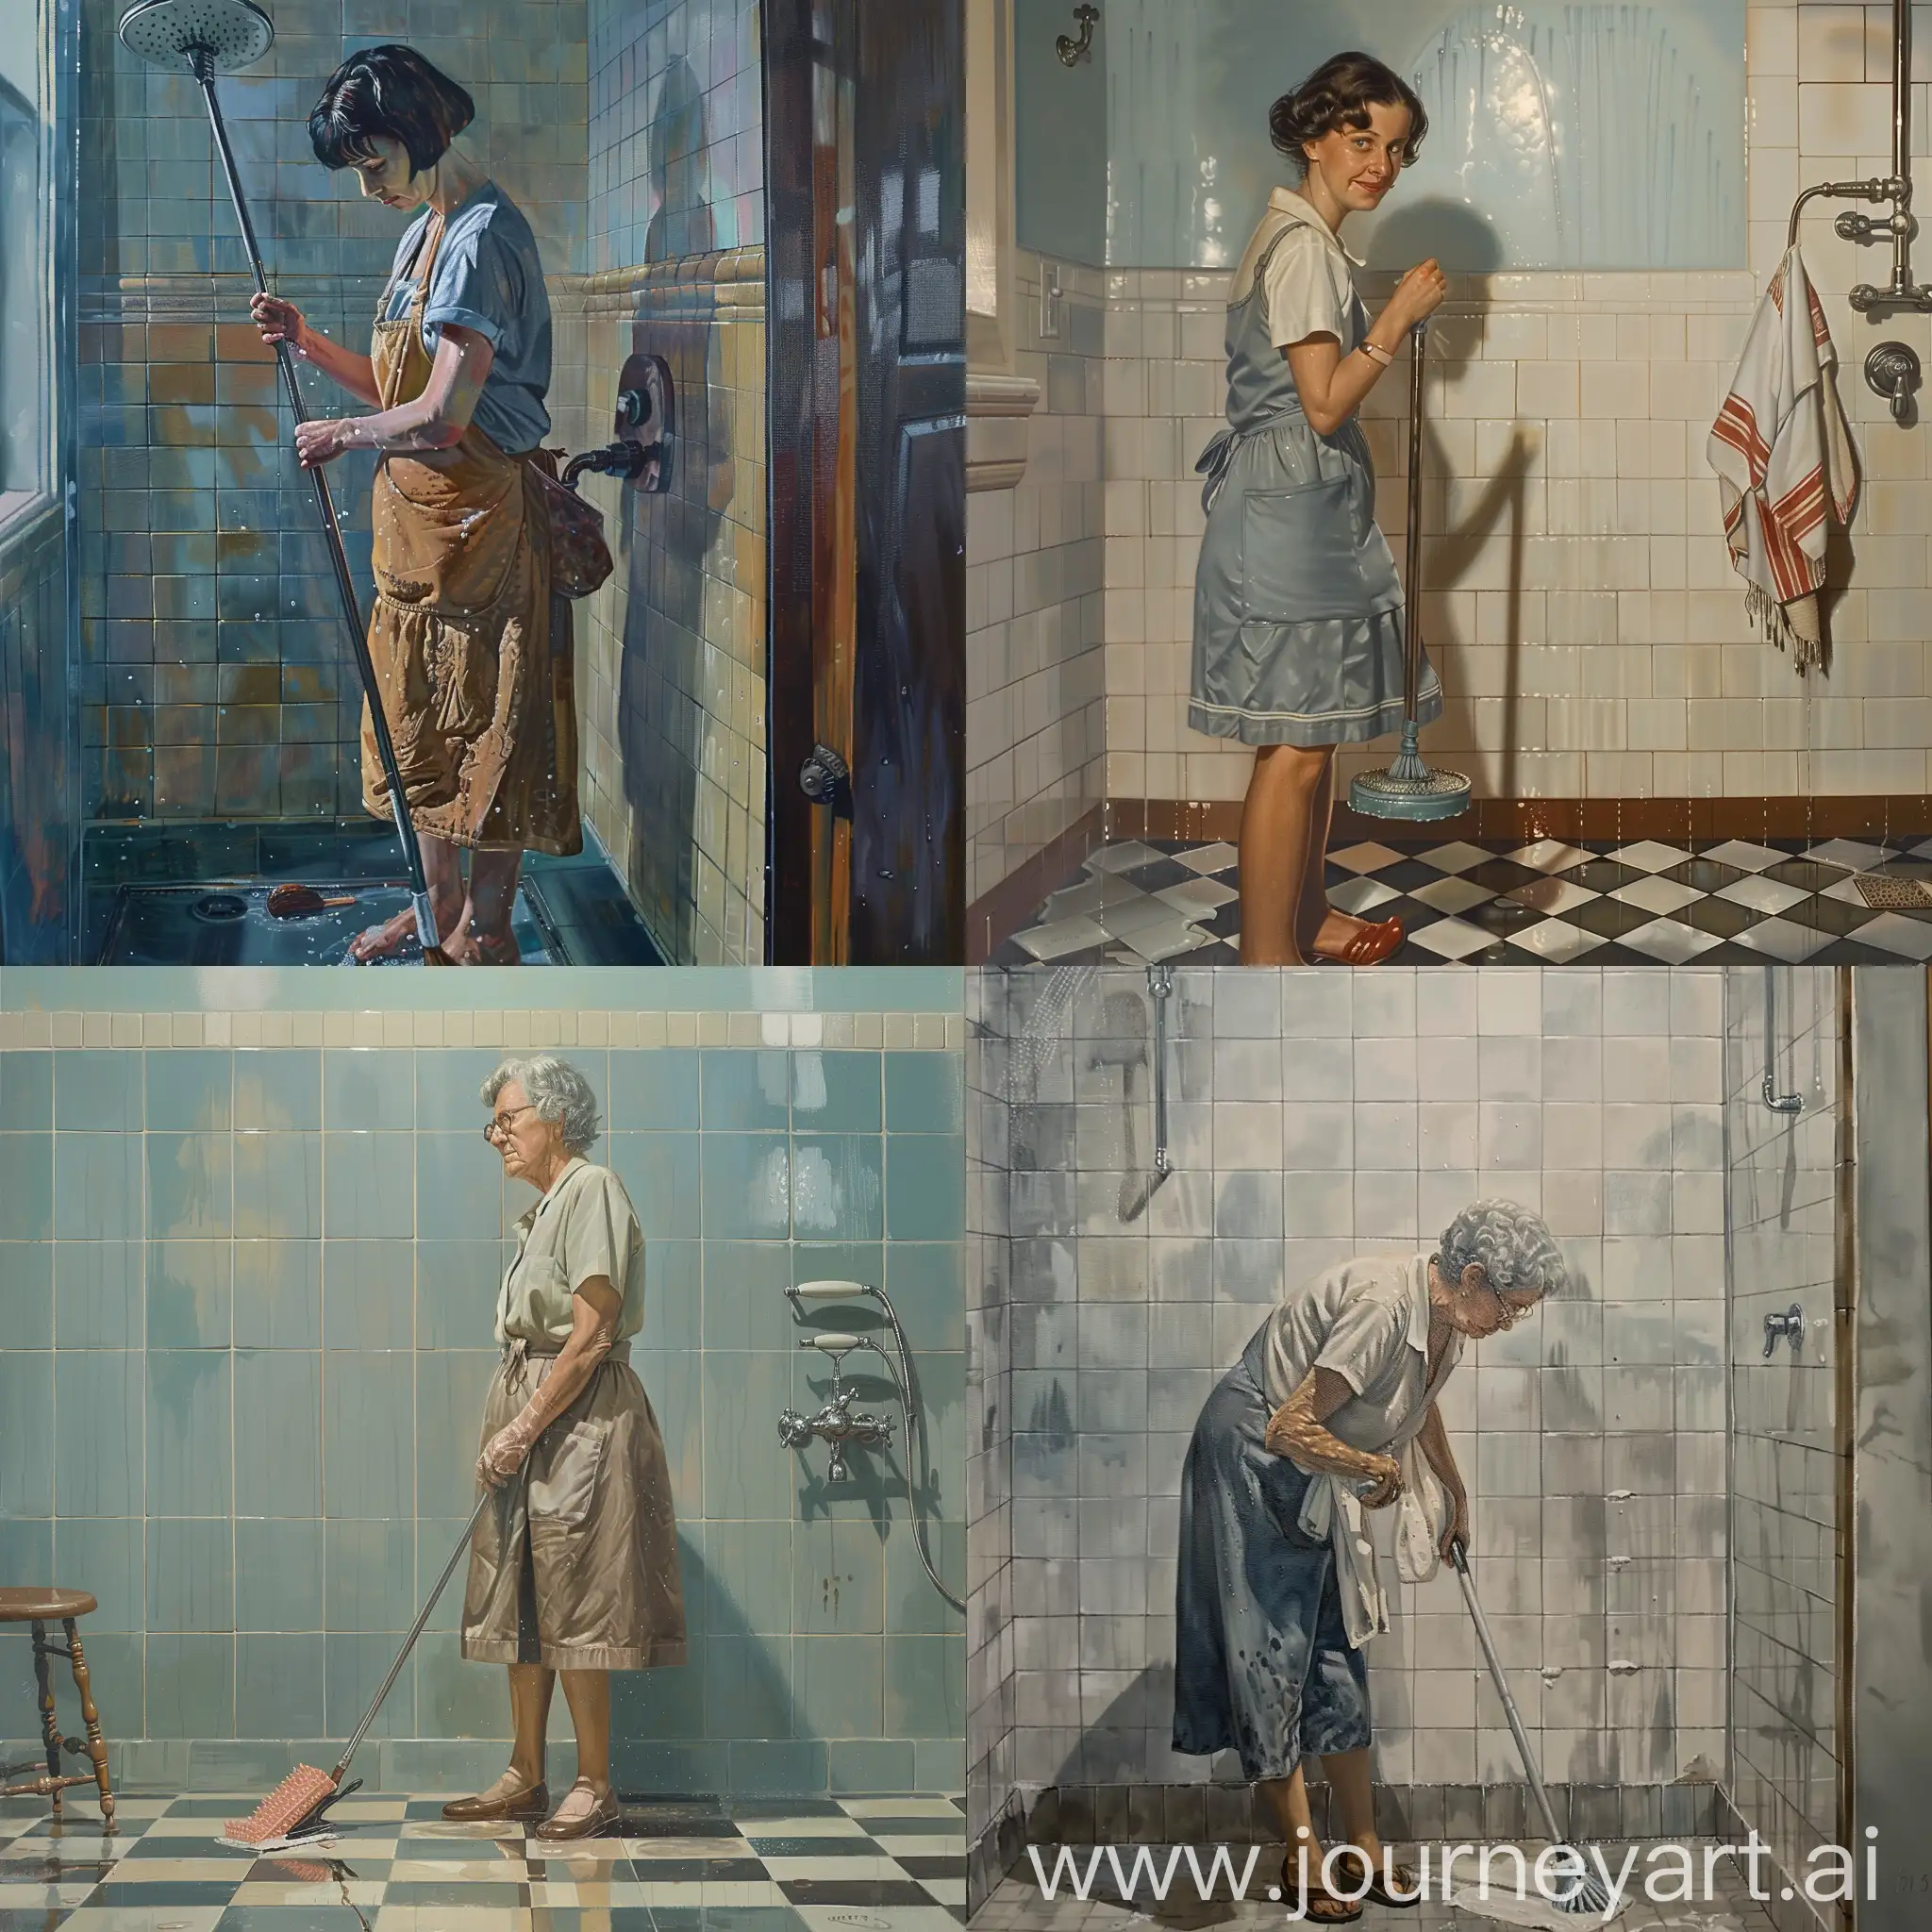 Velma-Dinkley-Cleaning-a-Shower-Realistic-Portrait